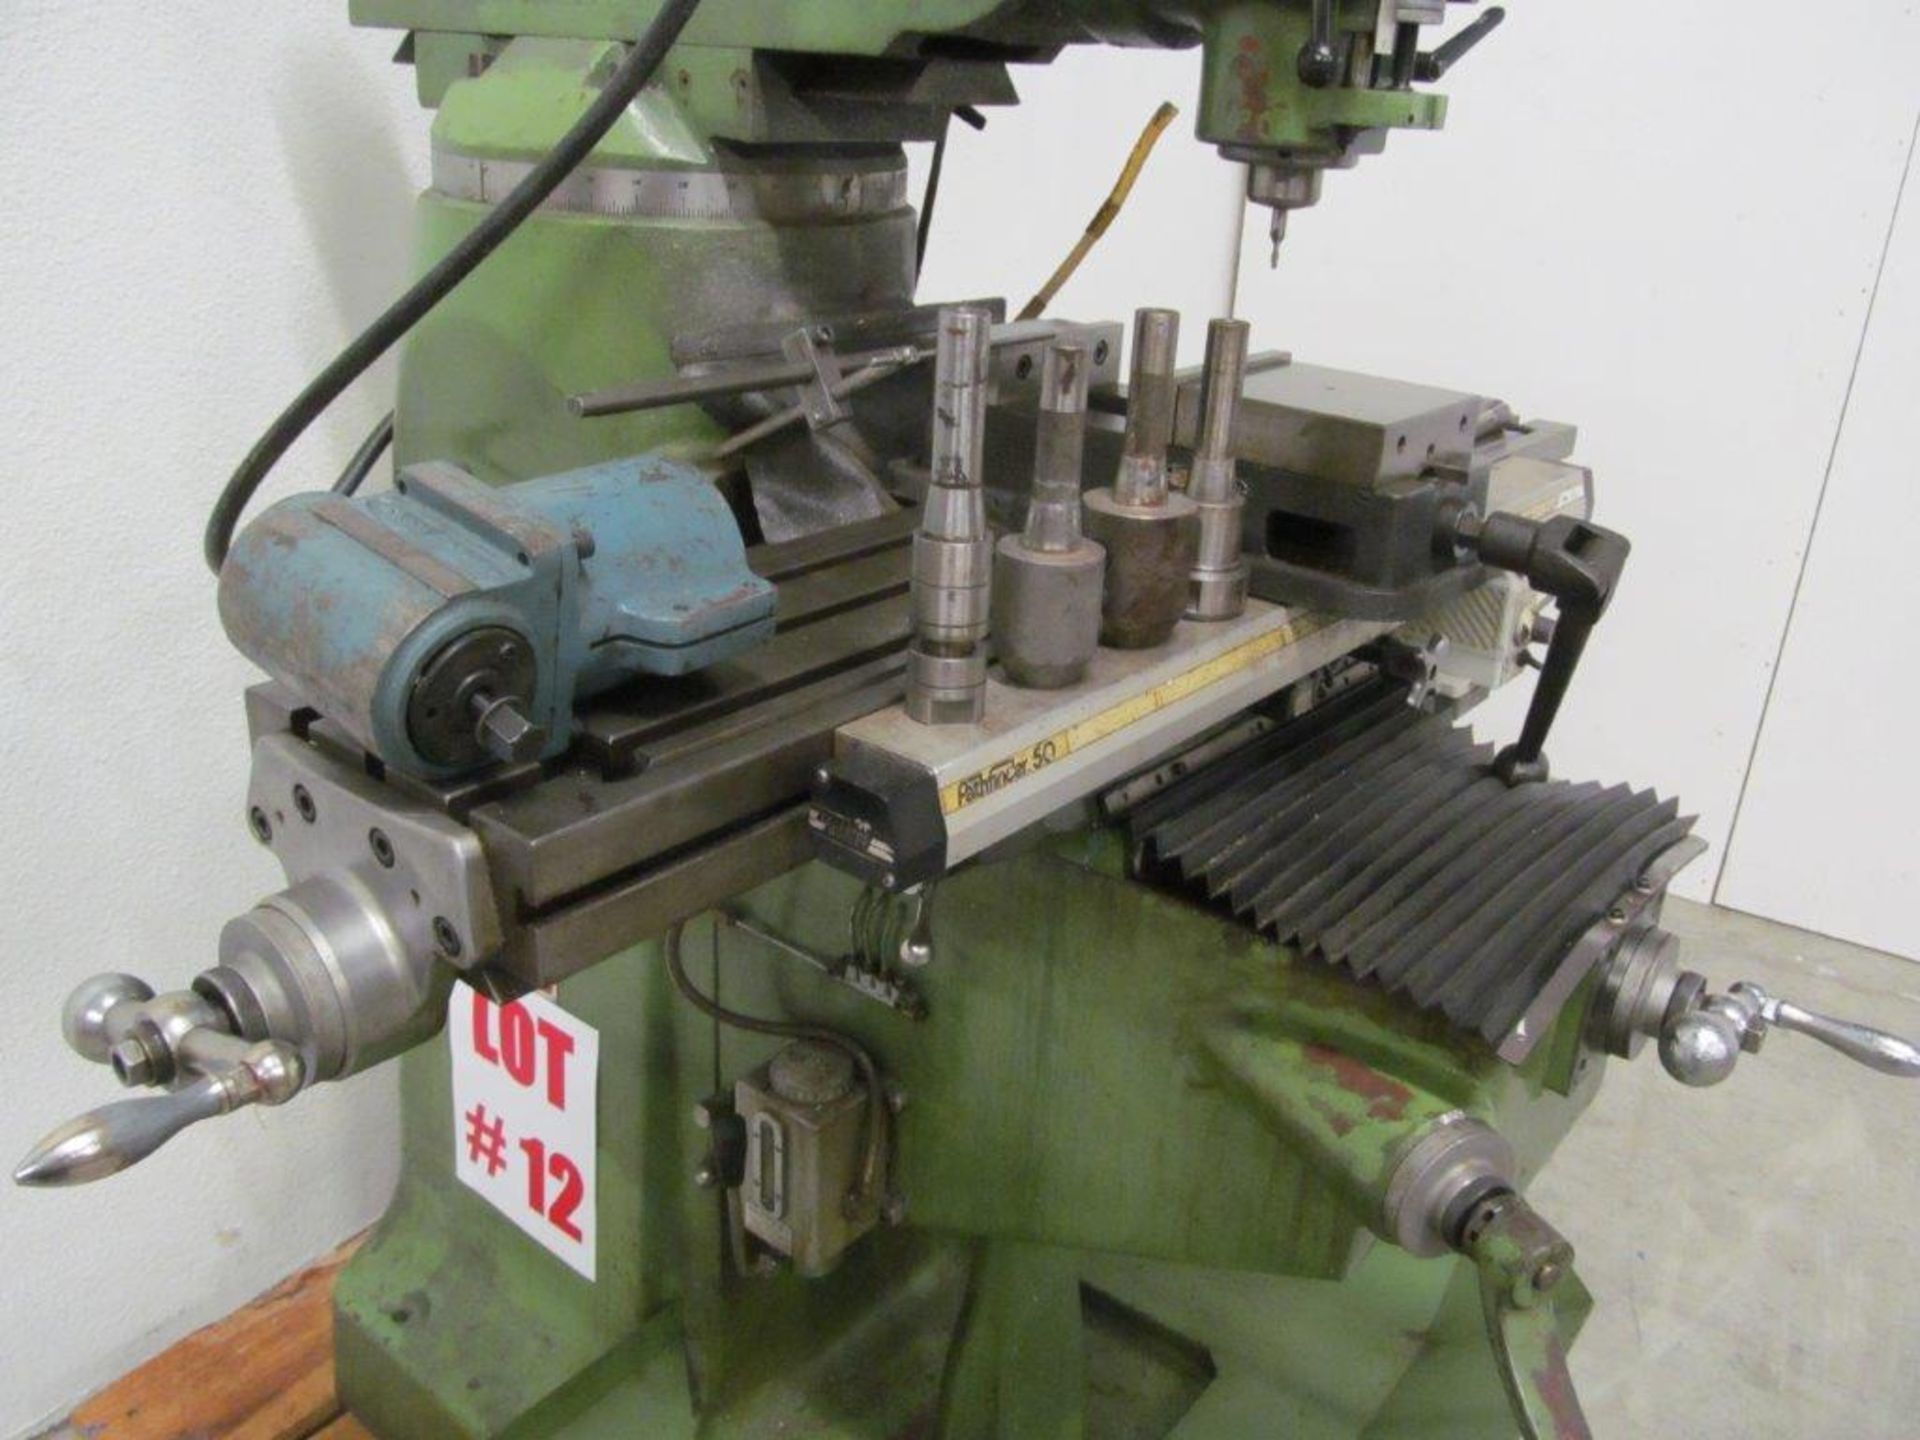 PRECIMASTER VERTICAL TURRET MILL, VARIABLE SPEED, MODEL: 2VS, S/N: 01015R, TABLE: 9" X 48", C/W DRO, - Image 4 of 5